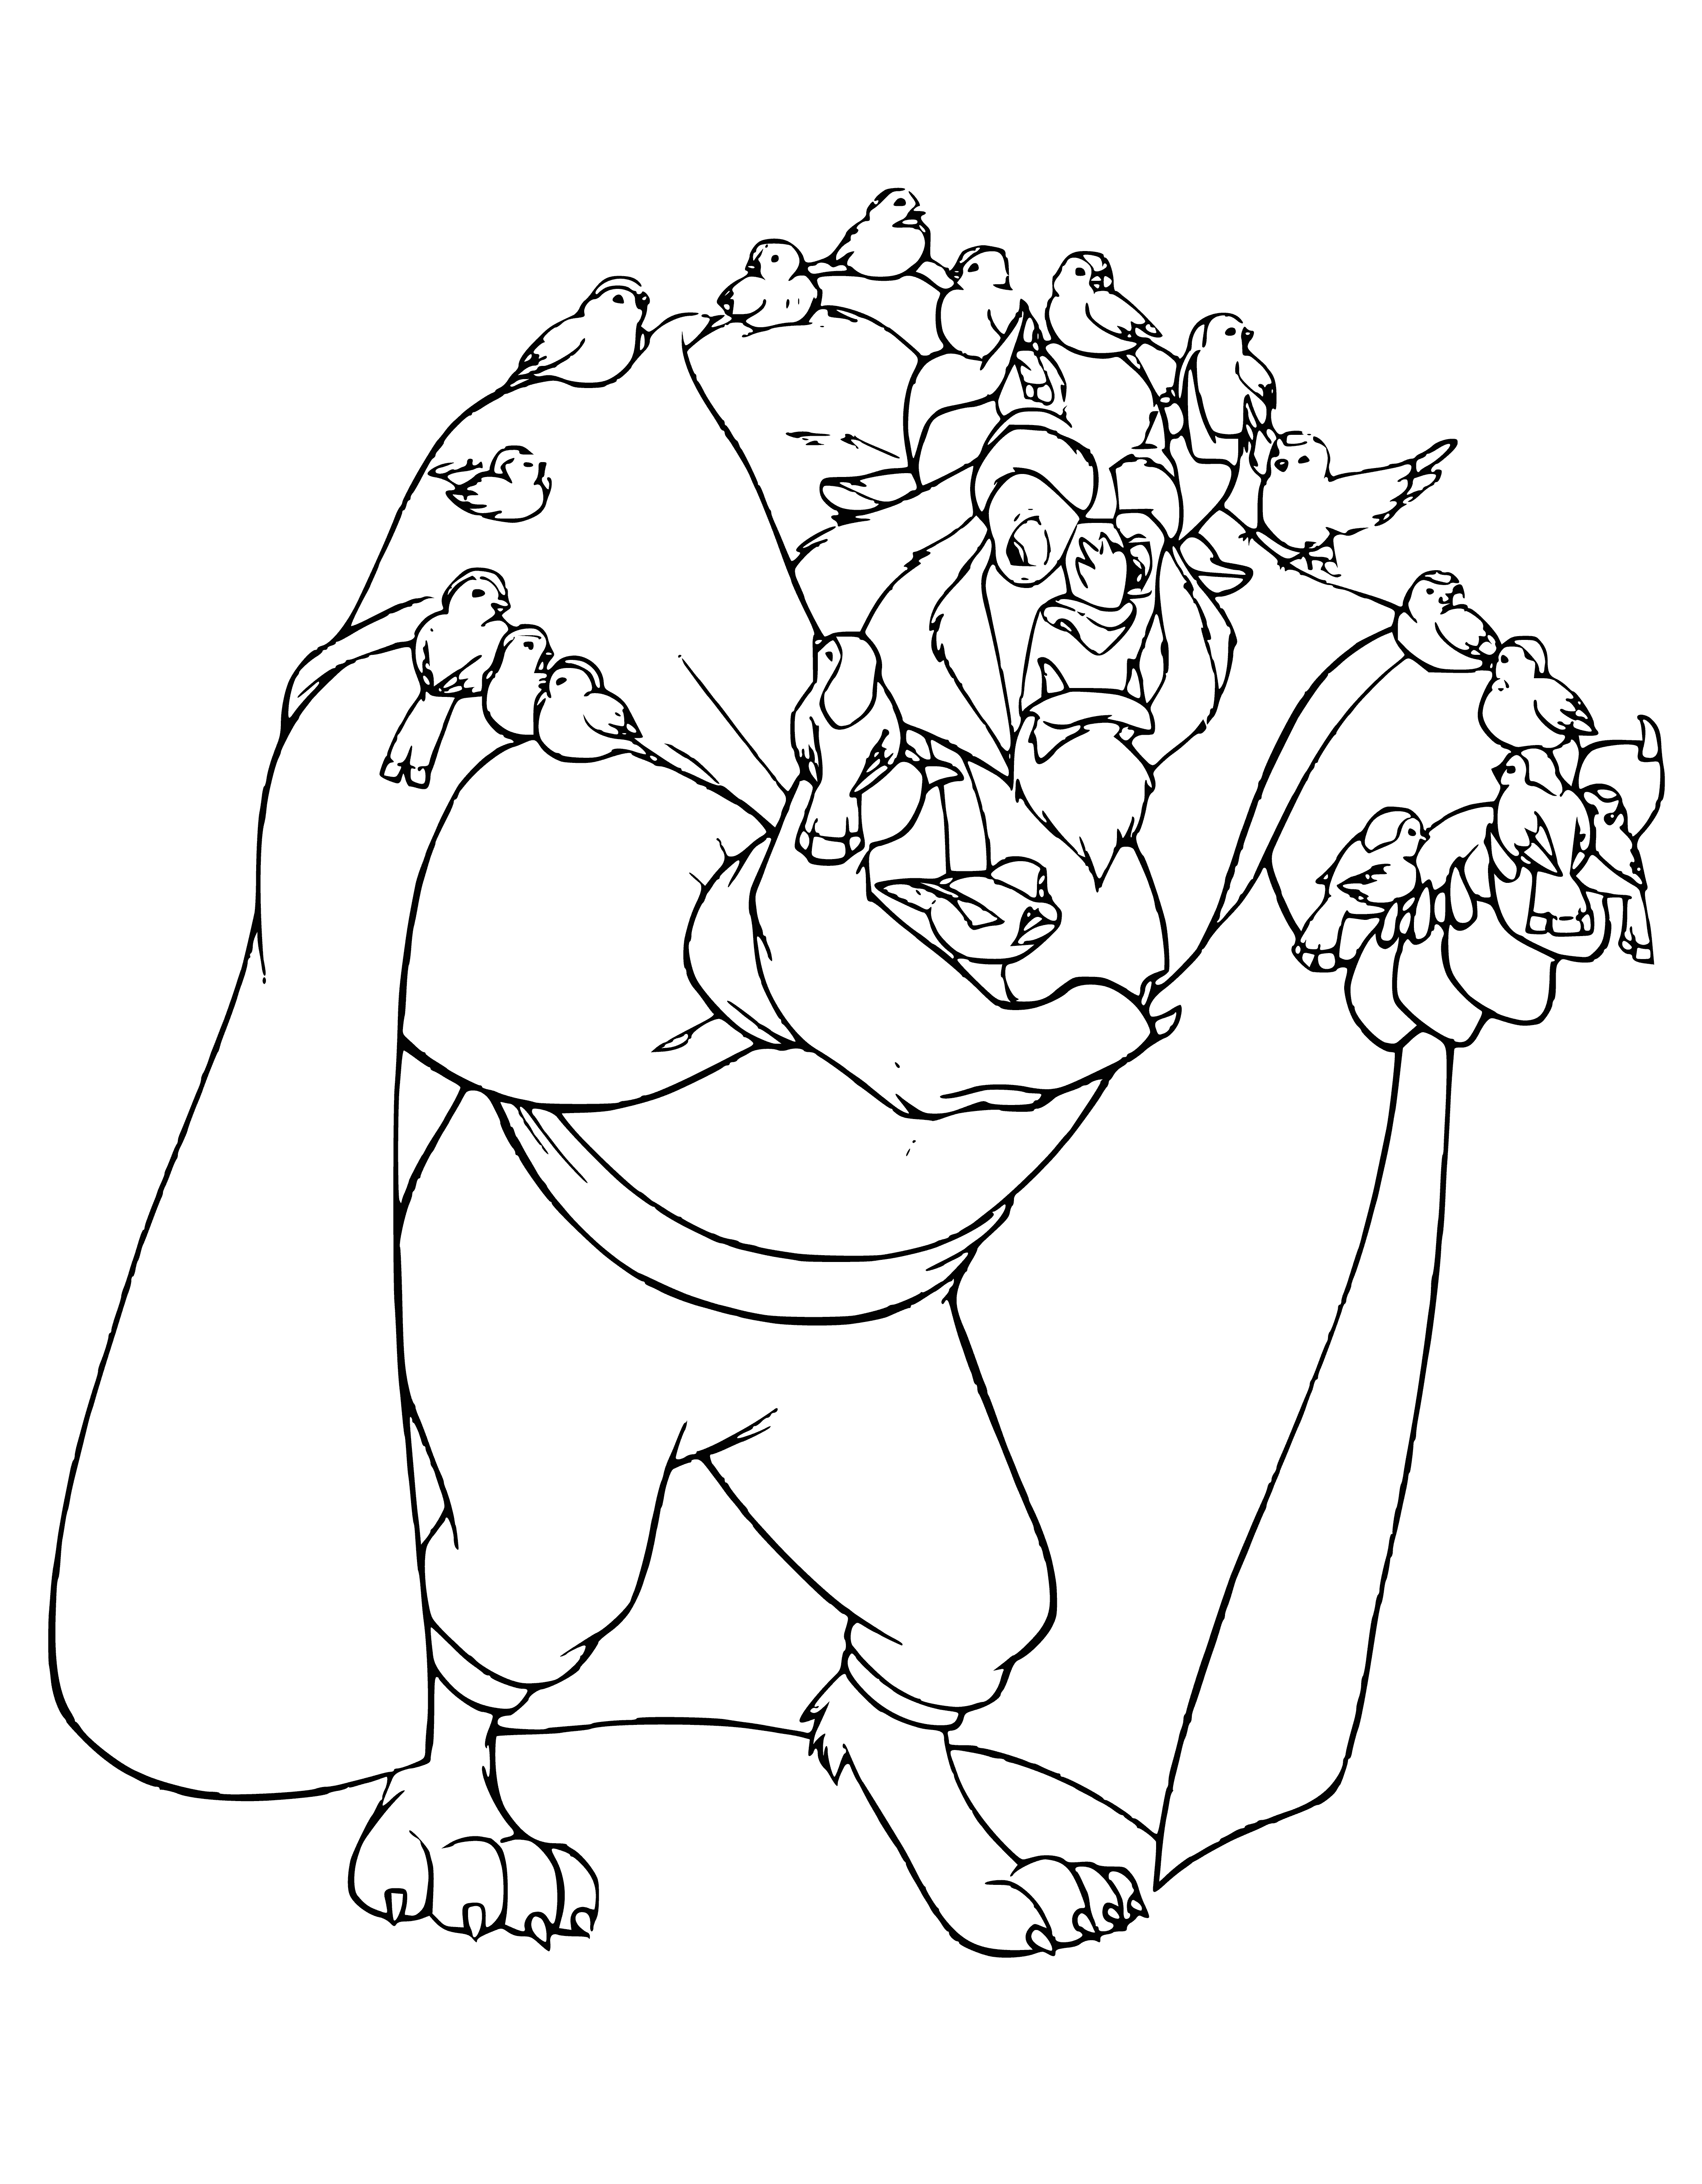 coloring page: Beast kneels, surrounded by birds, sharing a bag of food.